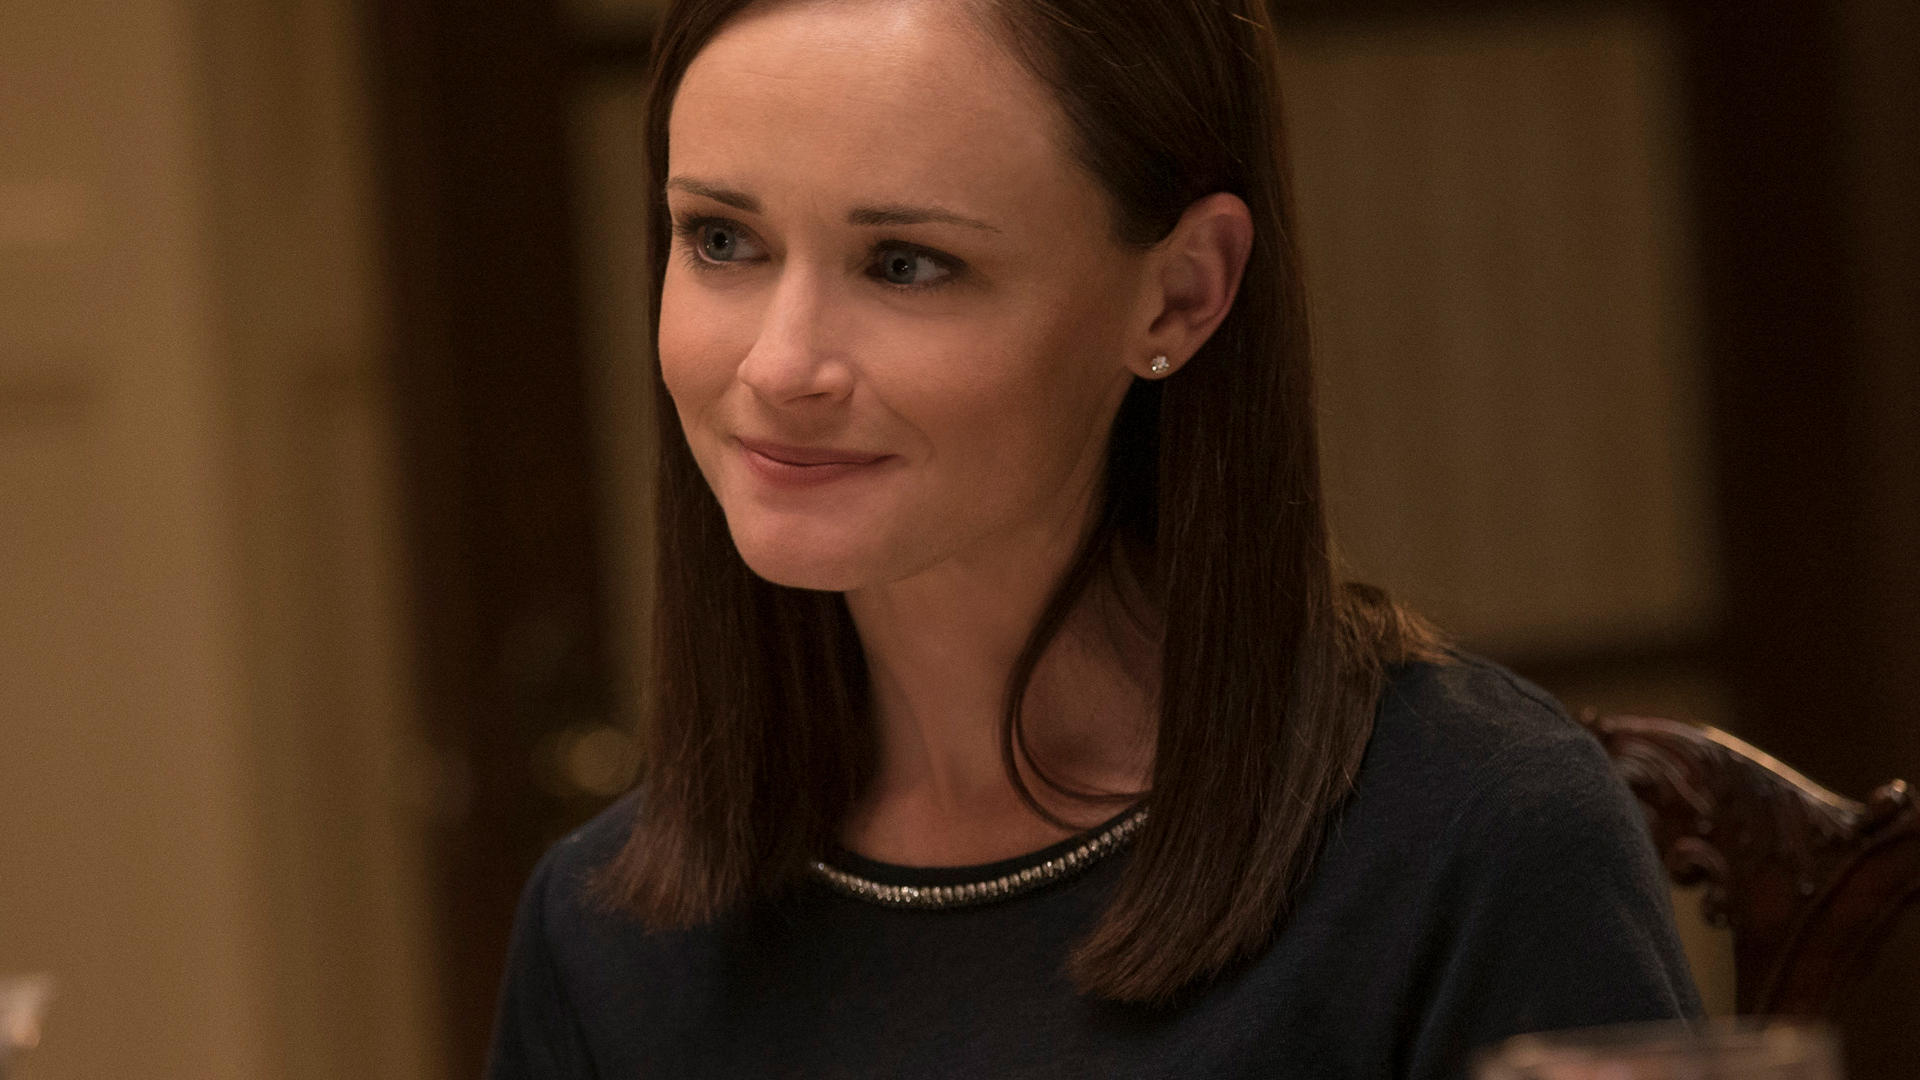 Alexis Bledel as Rory Gilmore on 'Gilmore Girls: A Year in the Life'